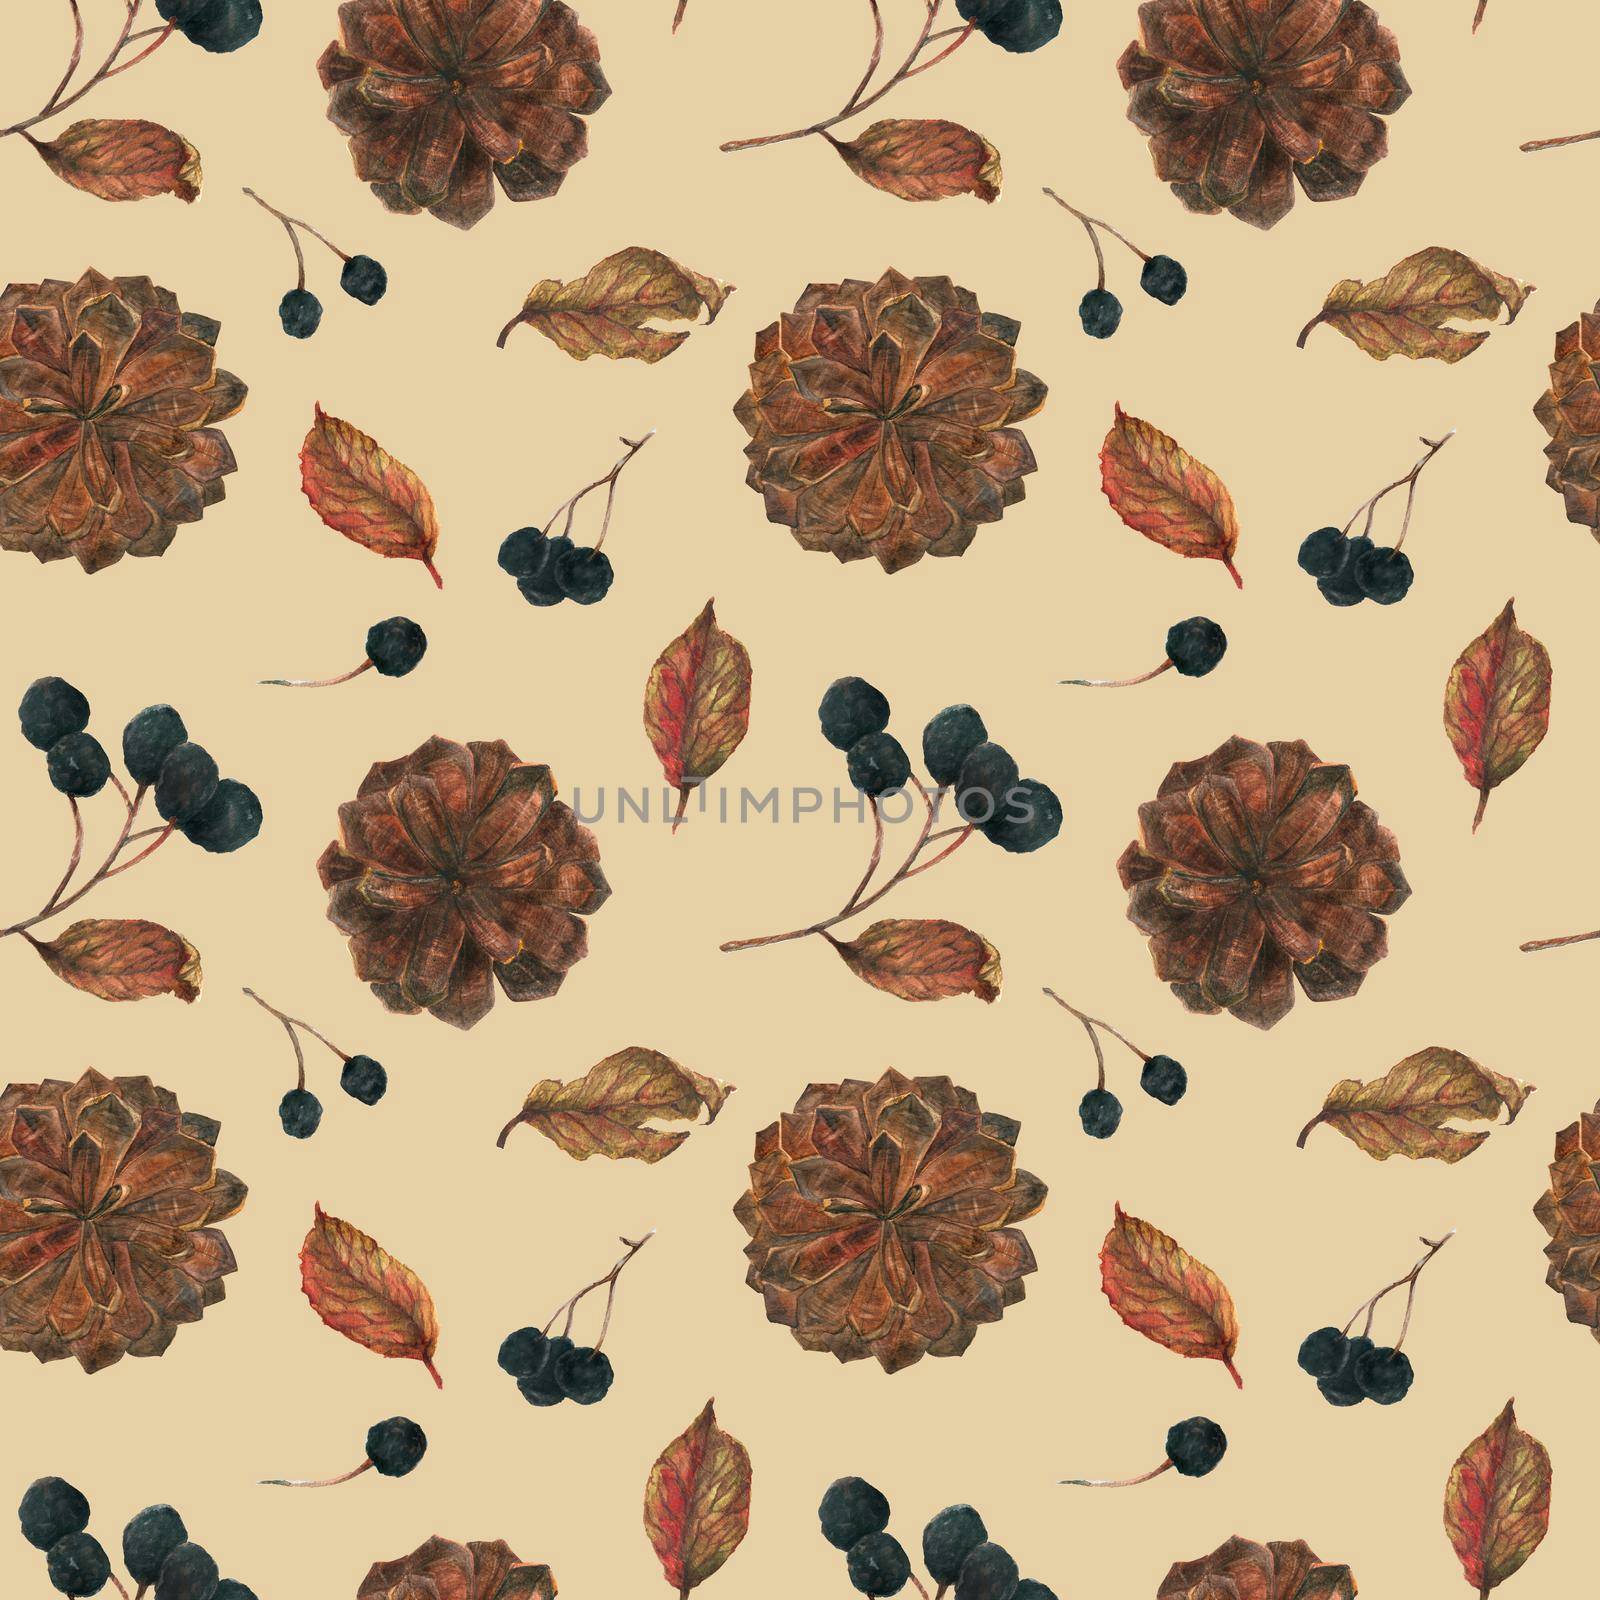 Aronia and Pine Cones for Christmas beige seamless pattern by Xeniasnowstorm